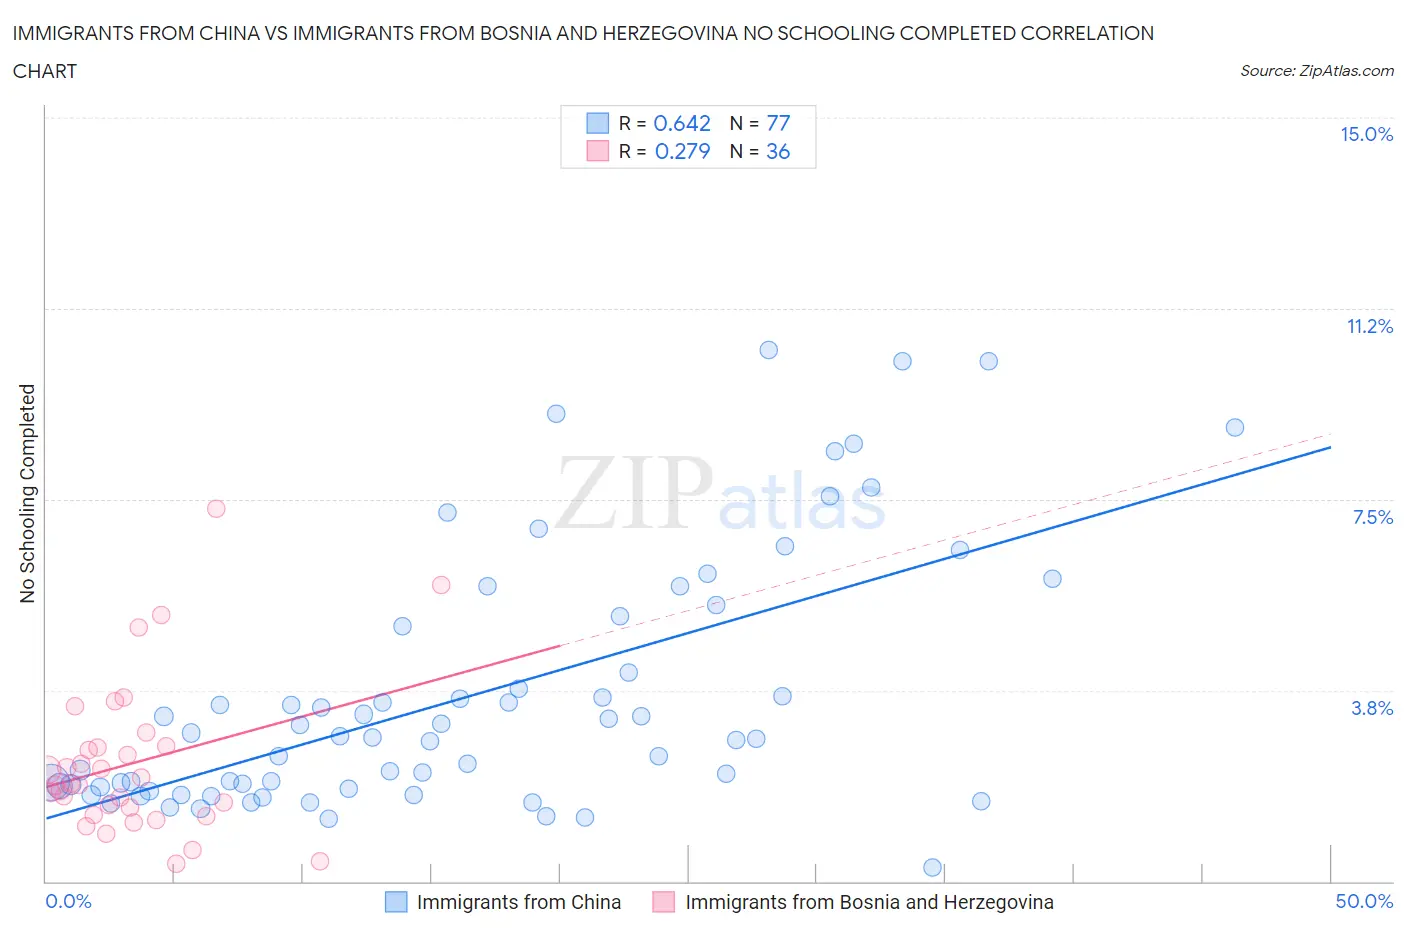 Immigrants from China vs Immigrants from Bosnia and Herzegovina No Schooling Completed